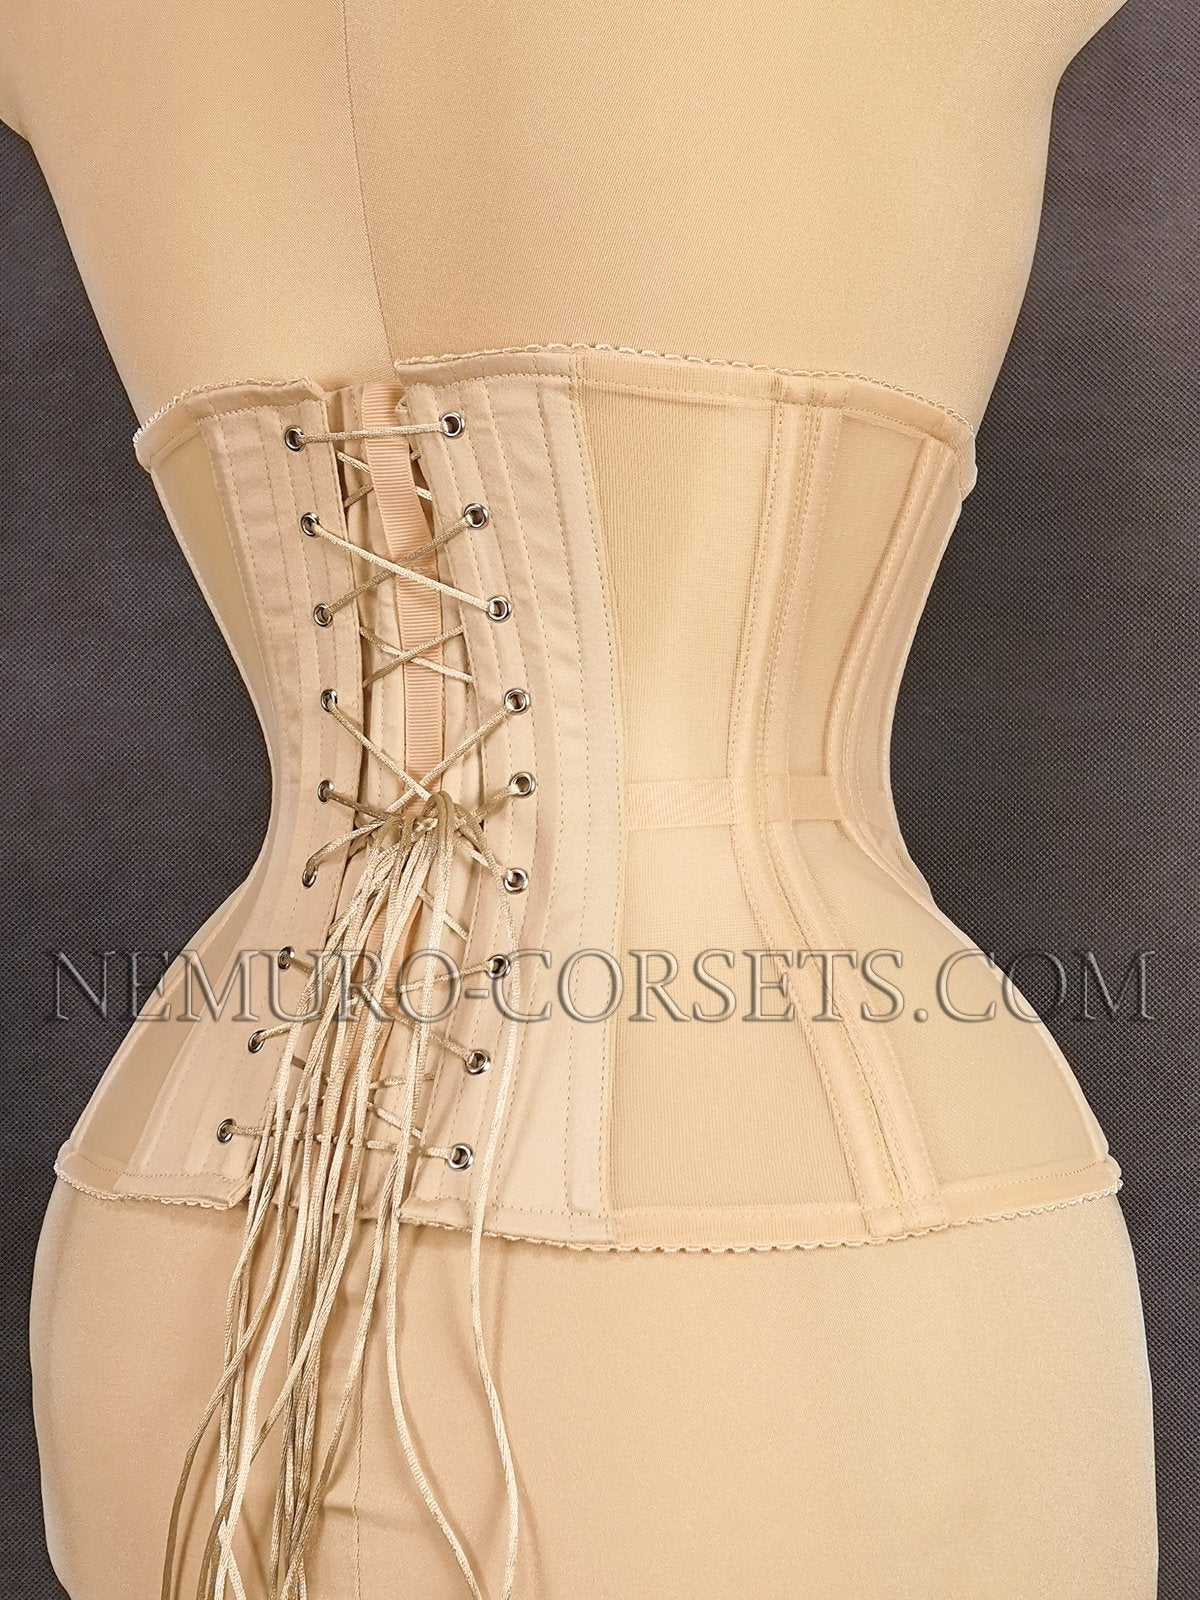 Mesh Corset Without Cups in White